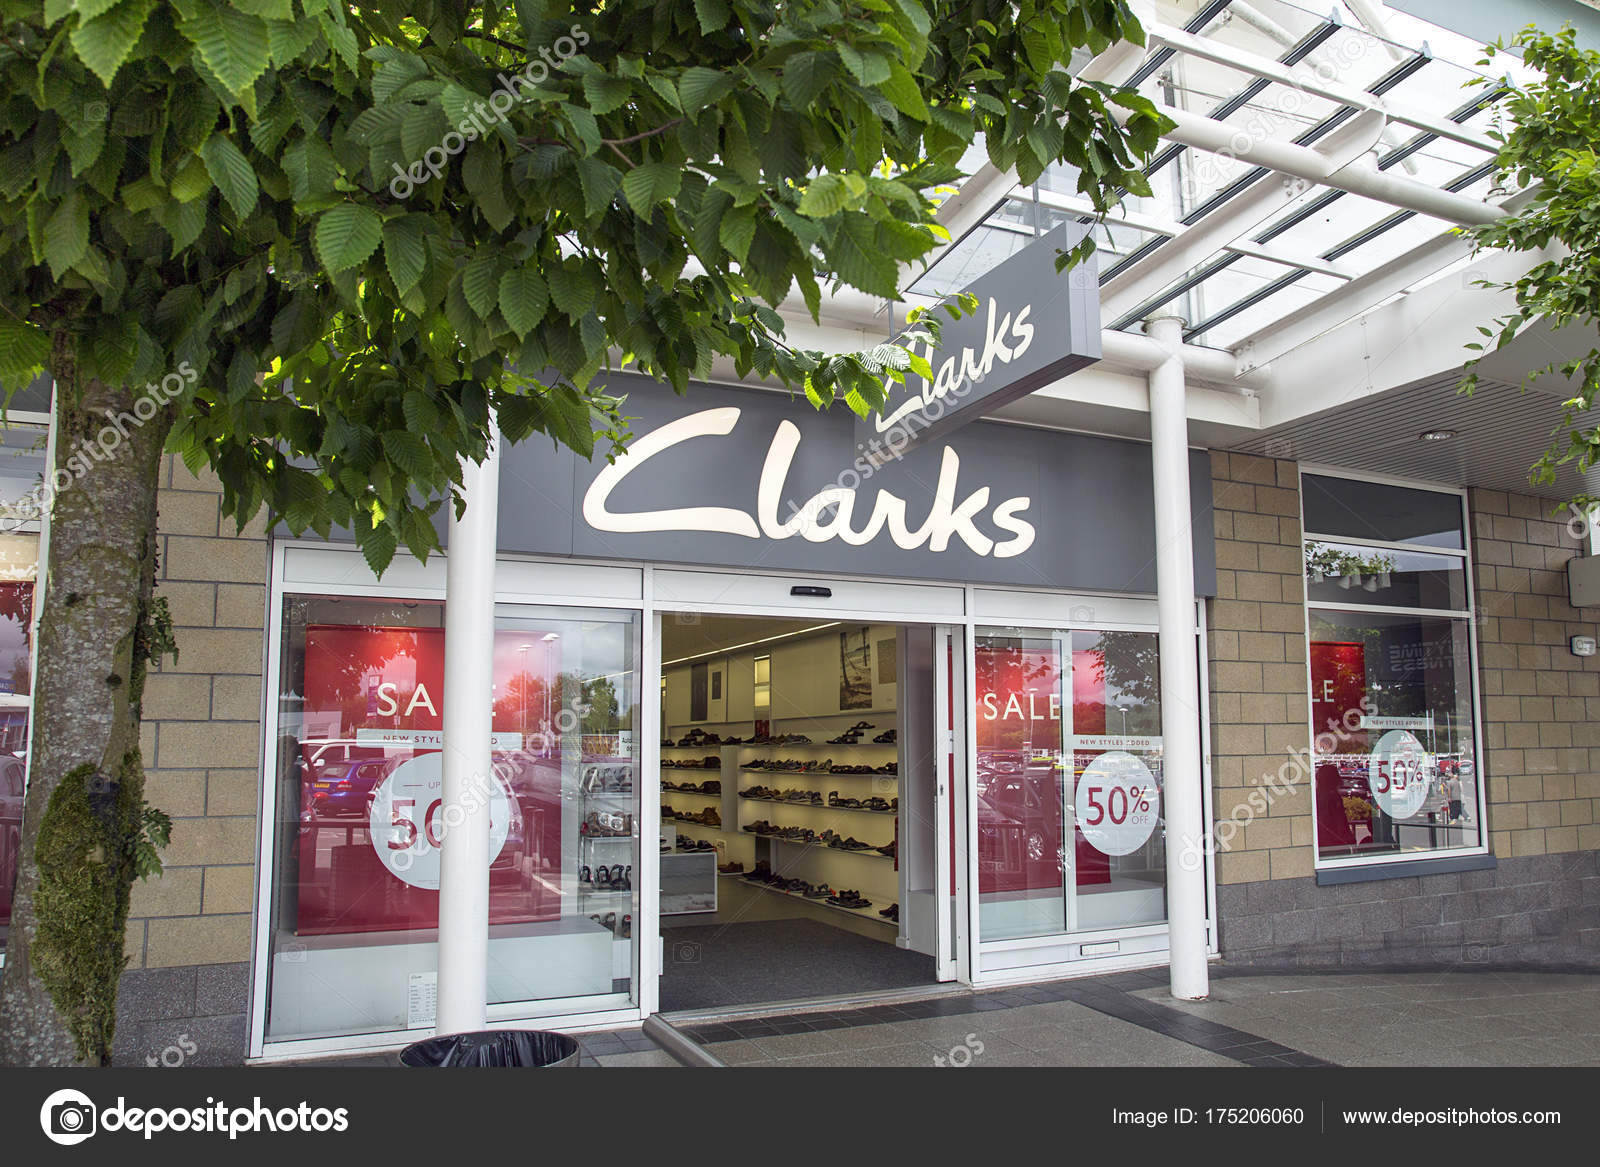 clarks shoes showroom in lucknow